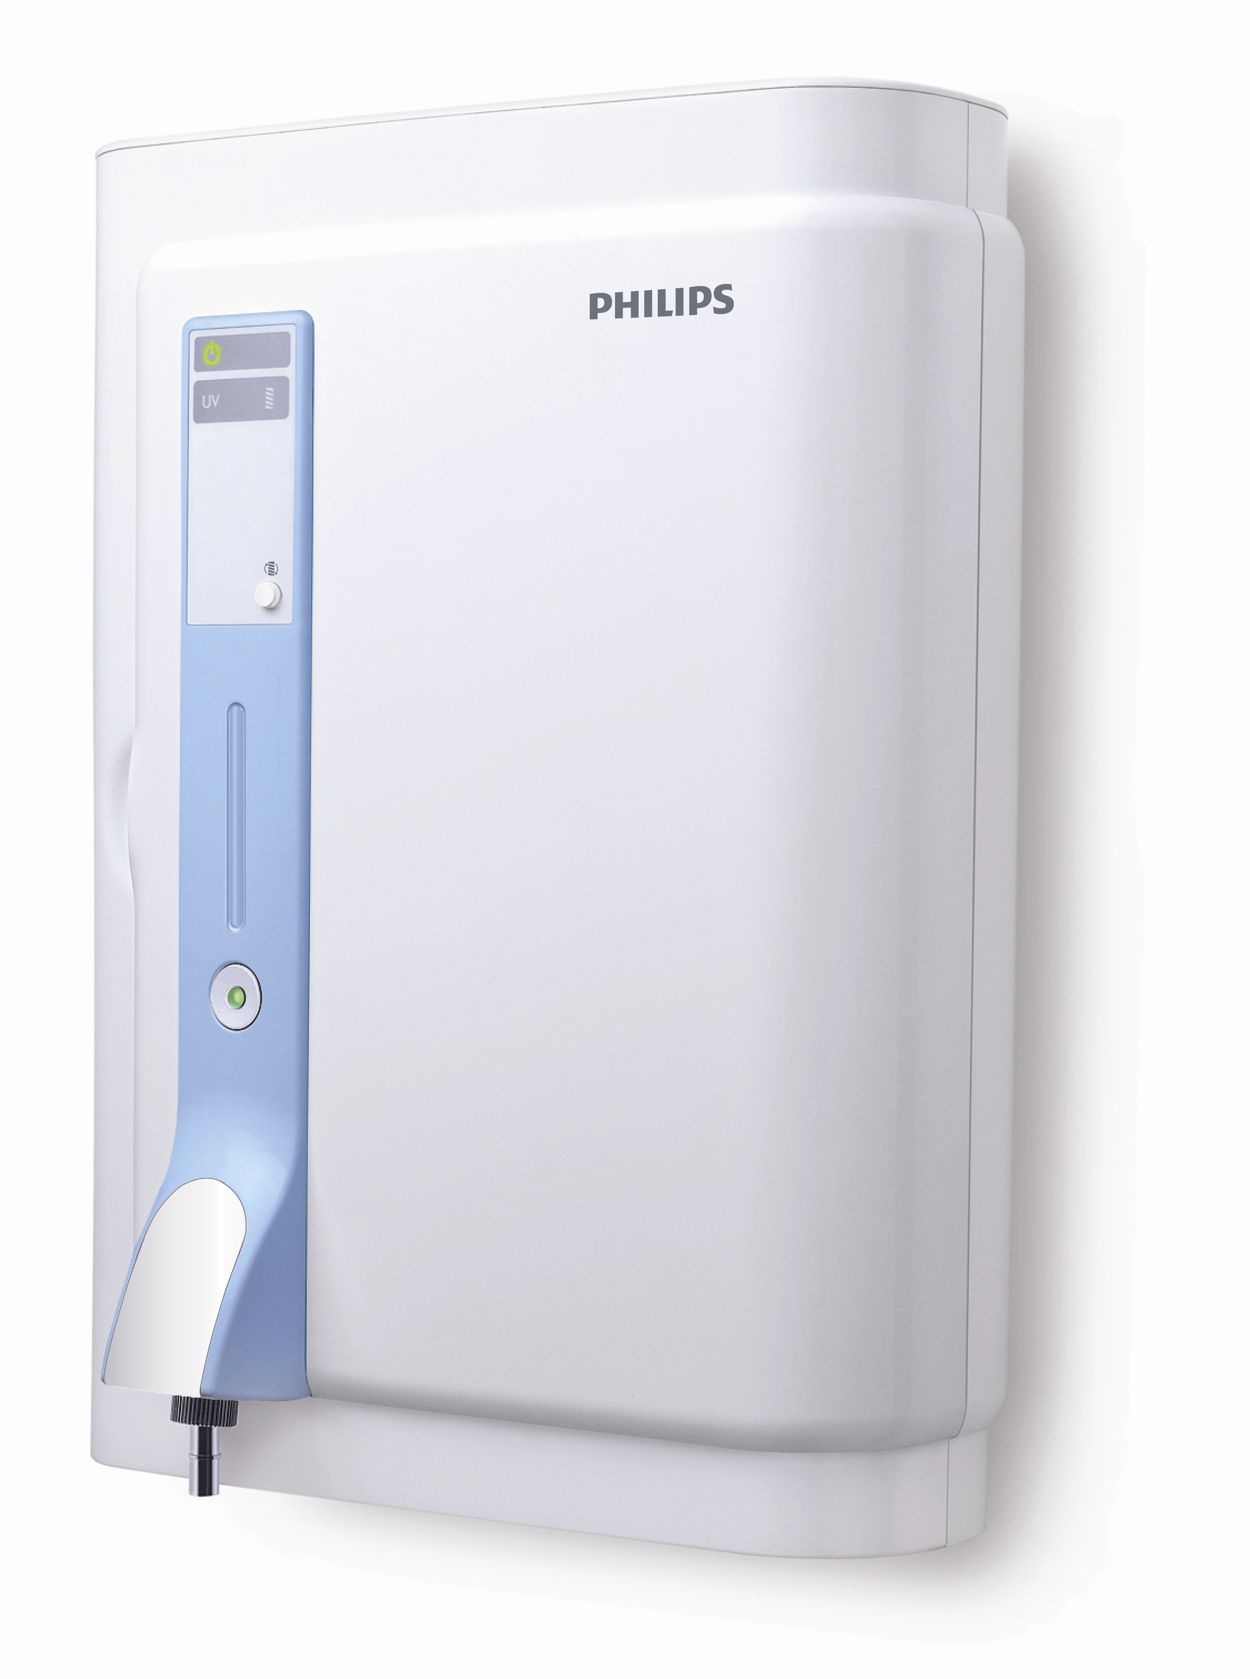 https://images.philips.com/is/image/philipsconsumer/7329aaac49a34da9a415af2301205050?$jpglarge$&wid=1250